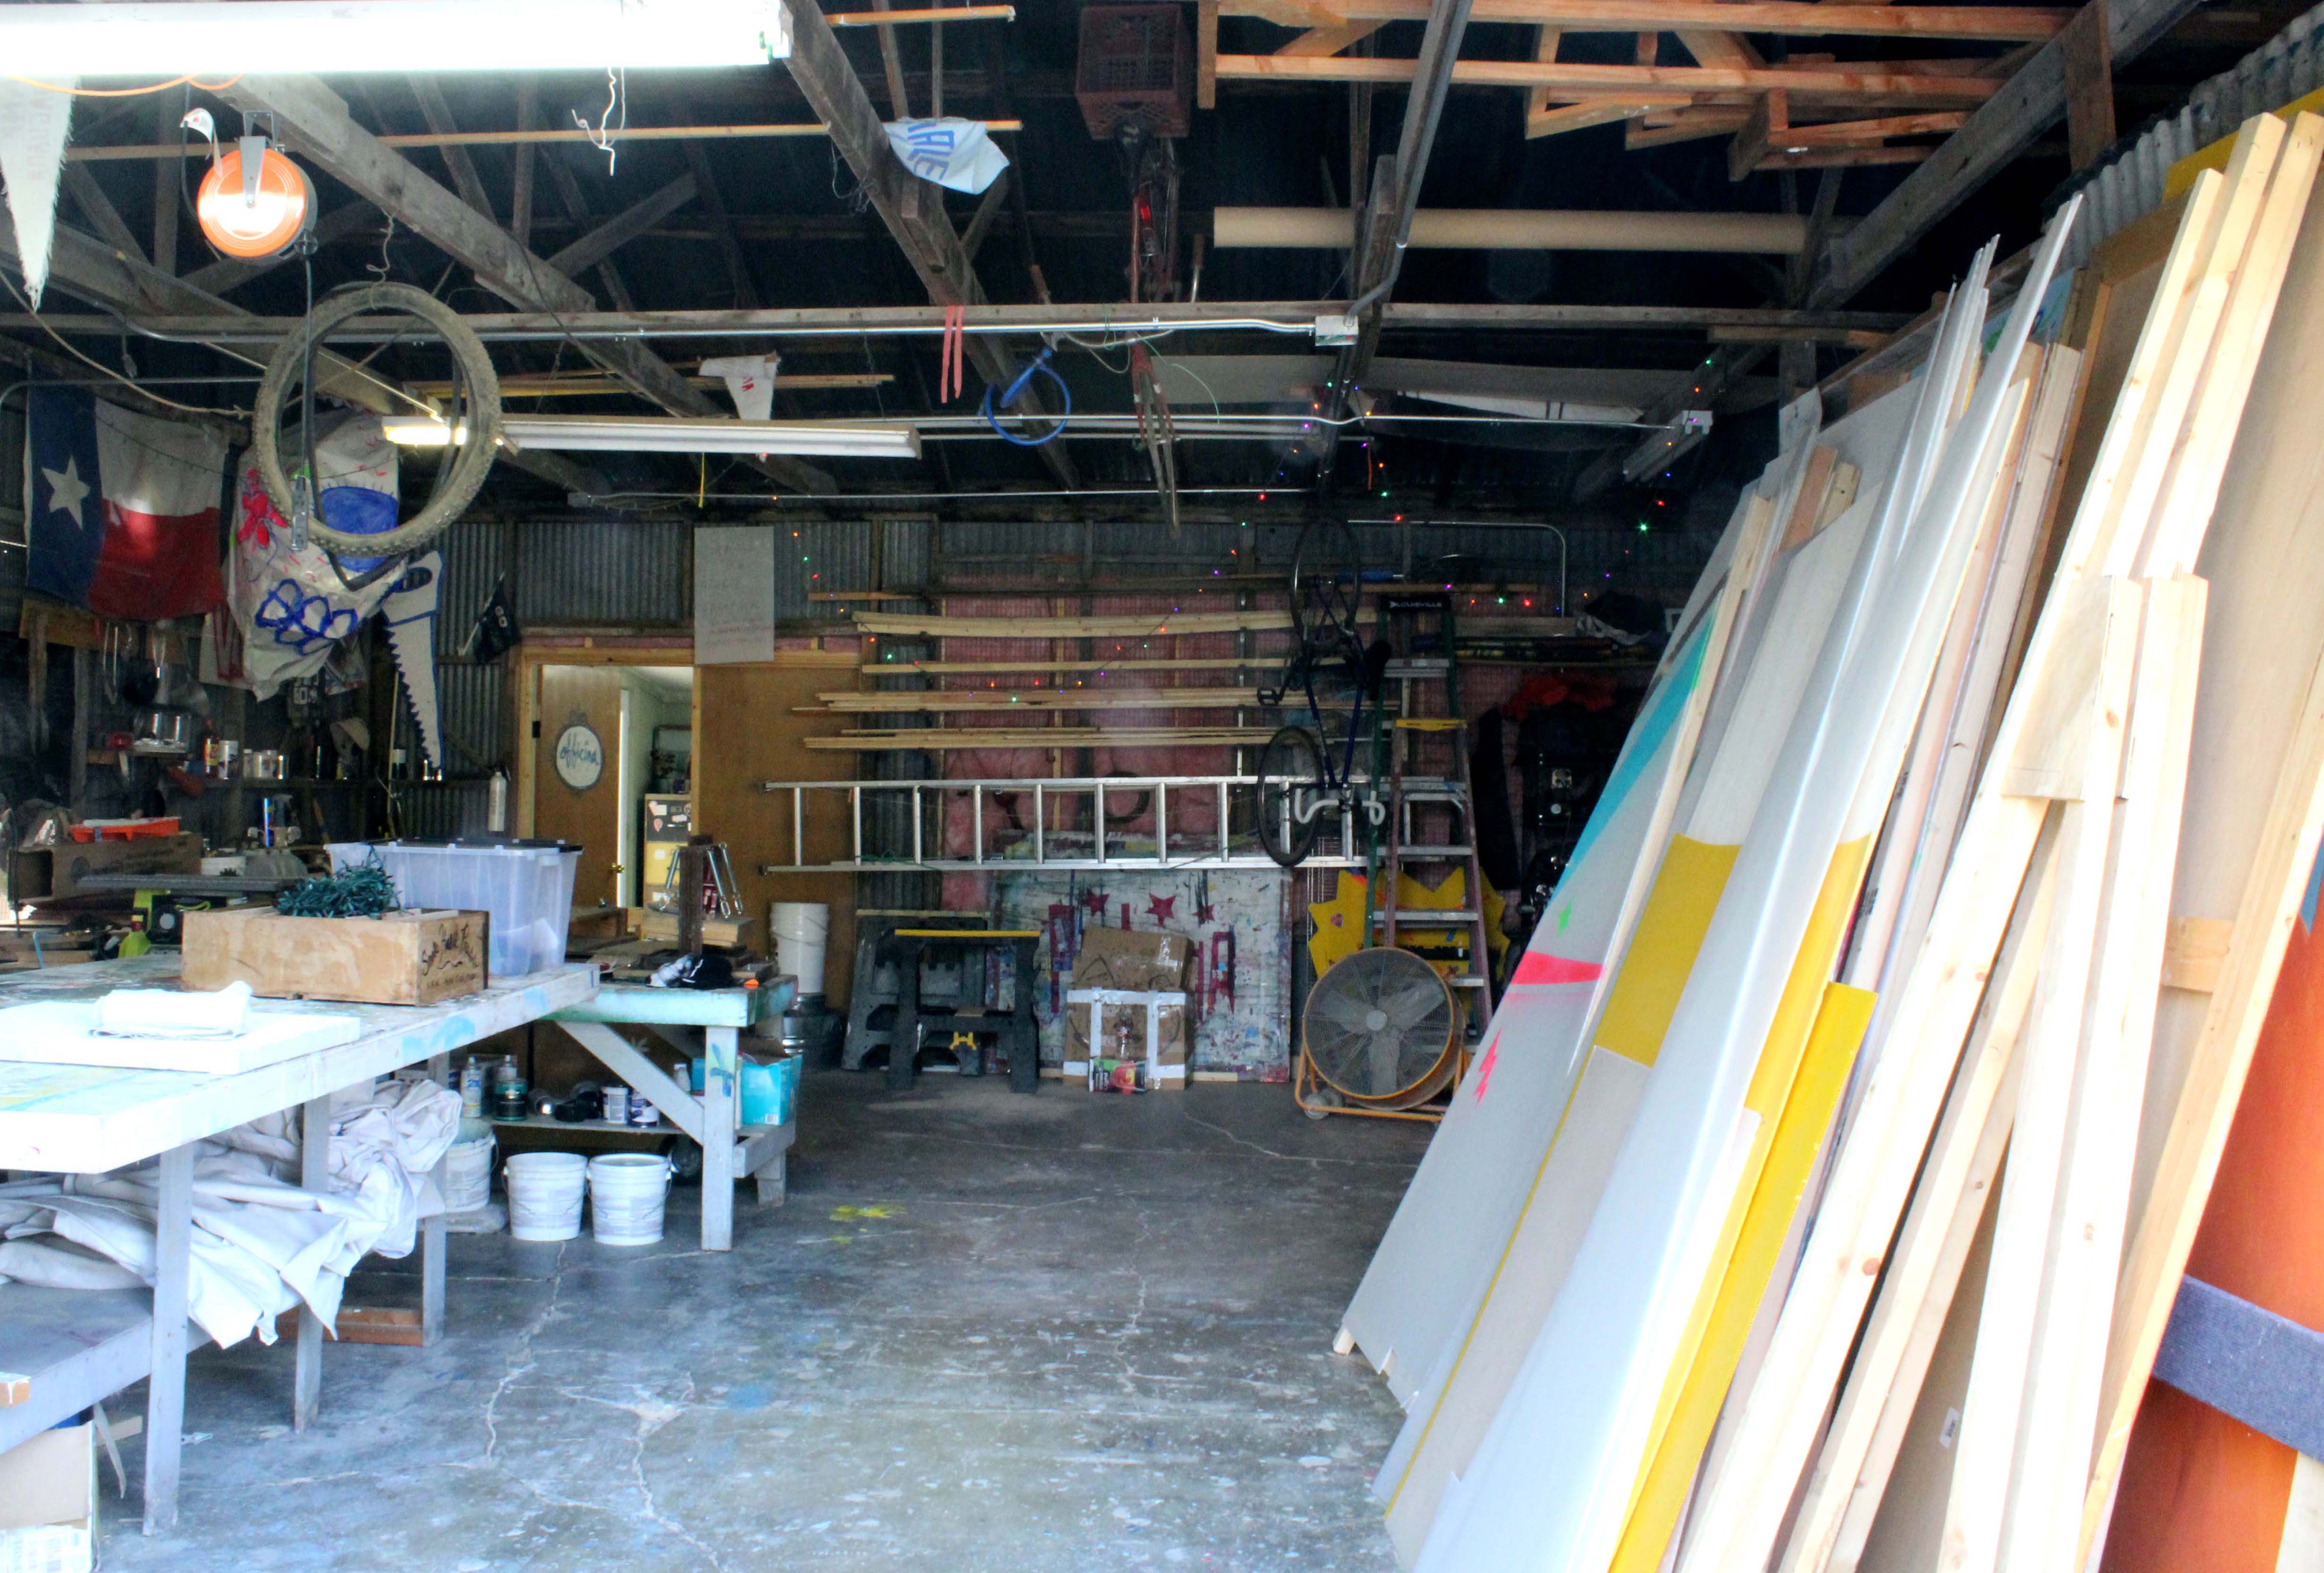 Workshop where Gaby builds canvases and other woodworking projects for Ortiz and Snake Hawk Press.